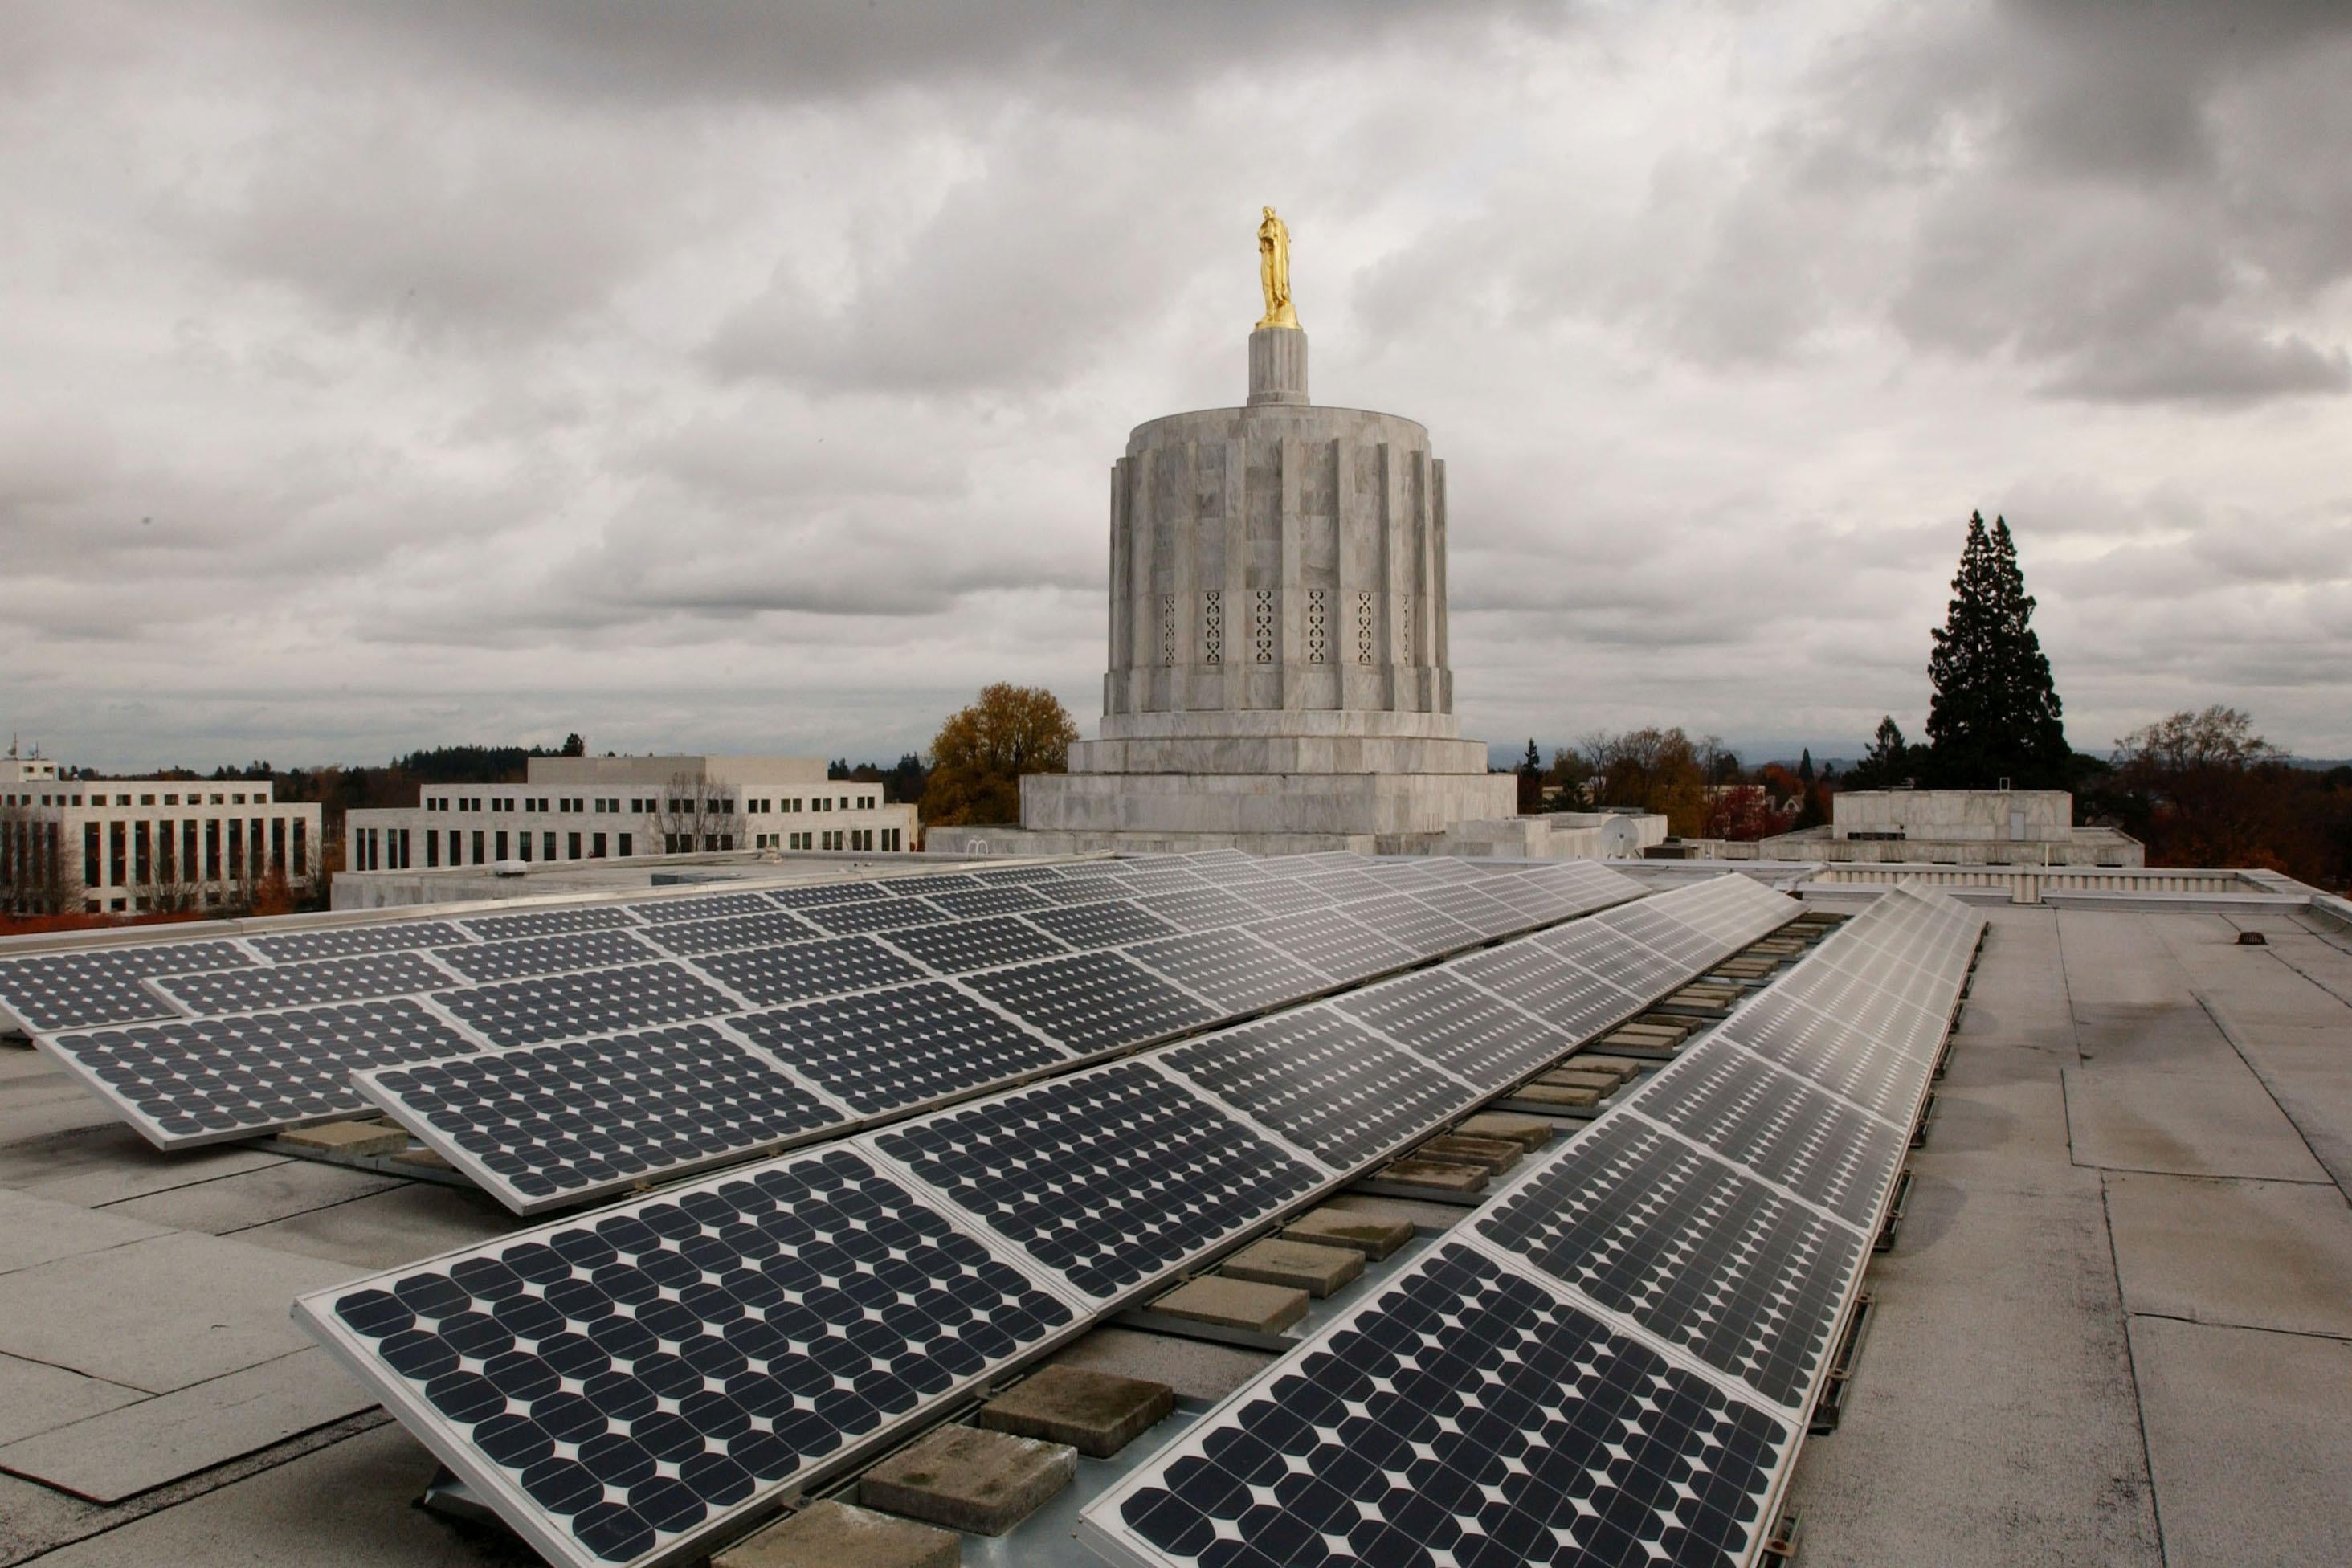 Several solar panels on the roof of the Oregon State Capitol building